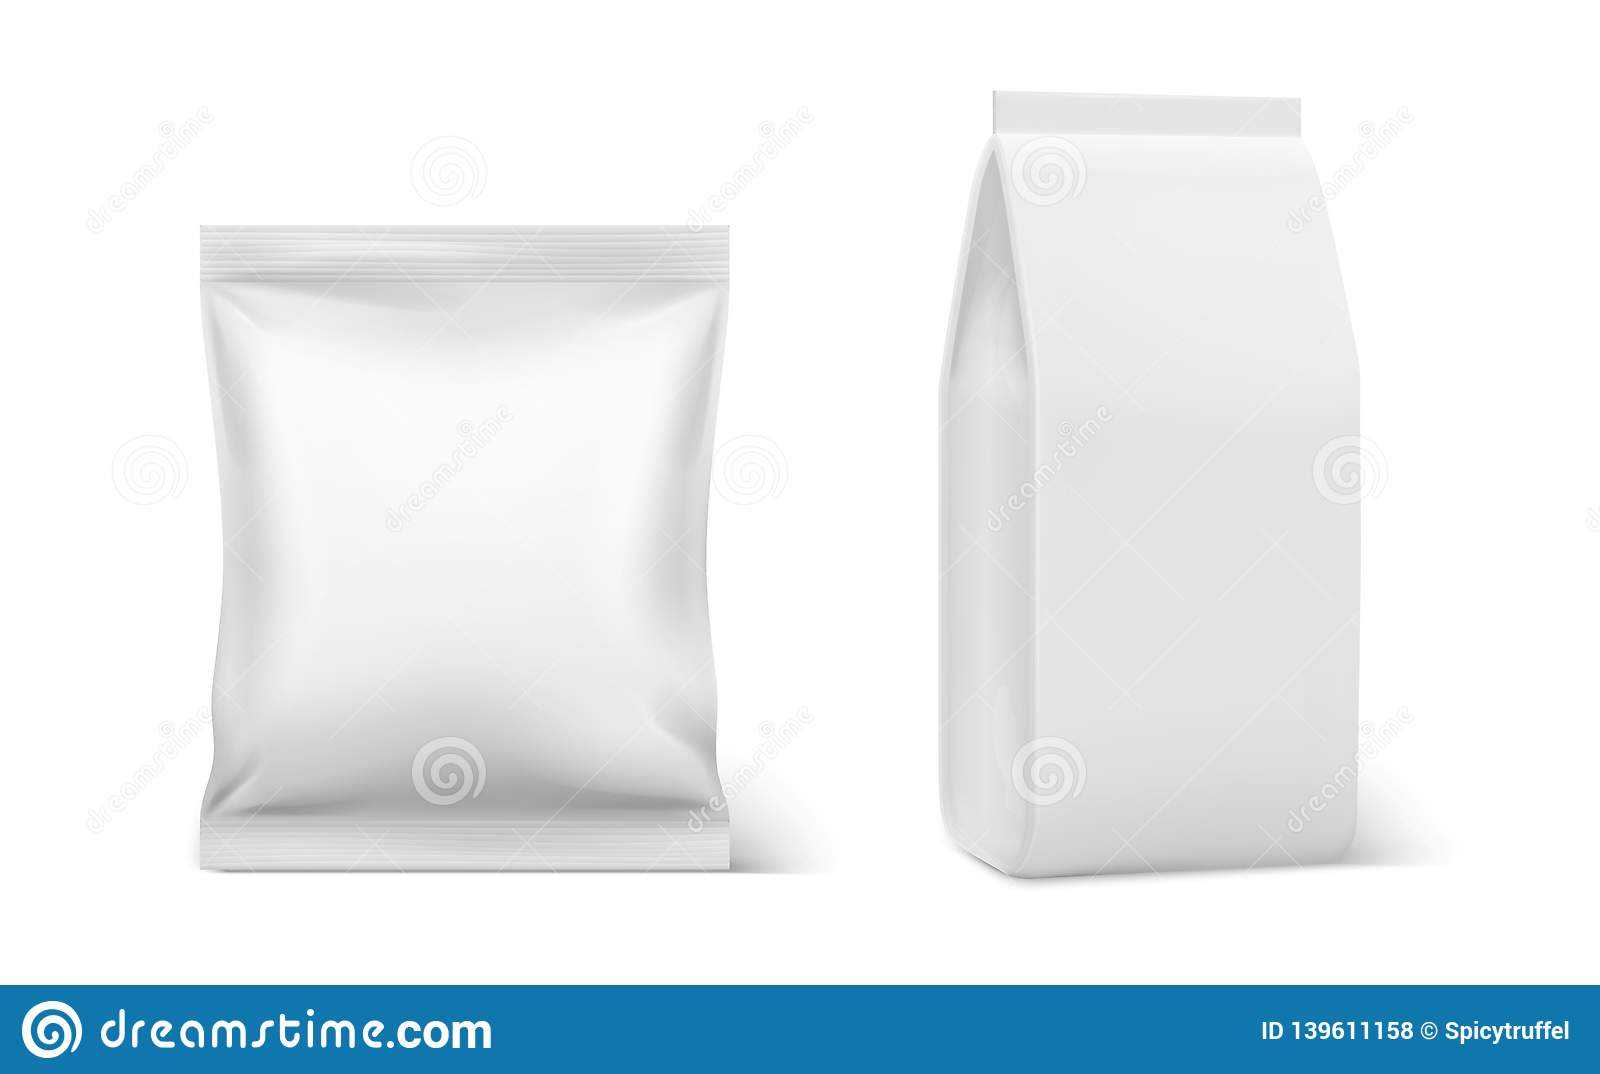 Realistic Pillow Pack. Coffee Doy Blank Mockup, Plastic With Regard To Blank Packaging Templates